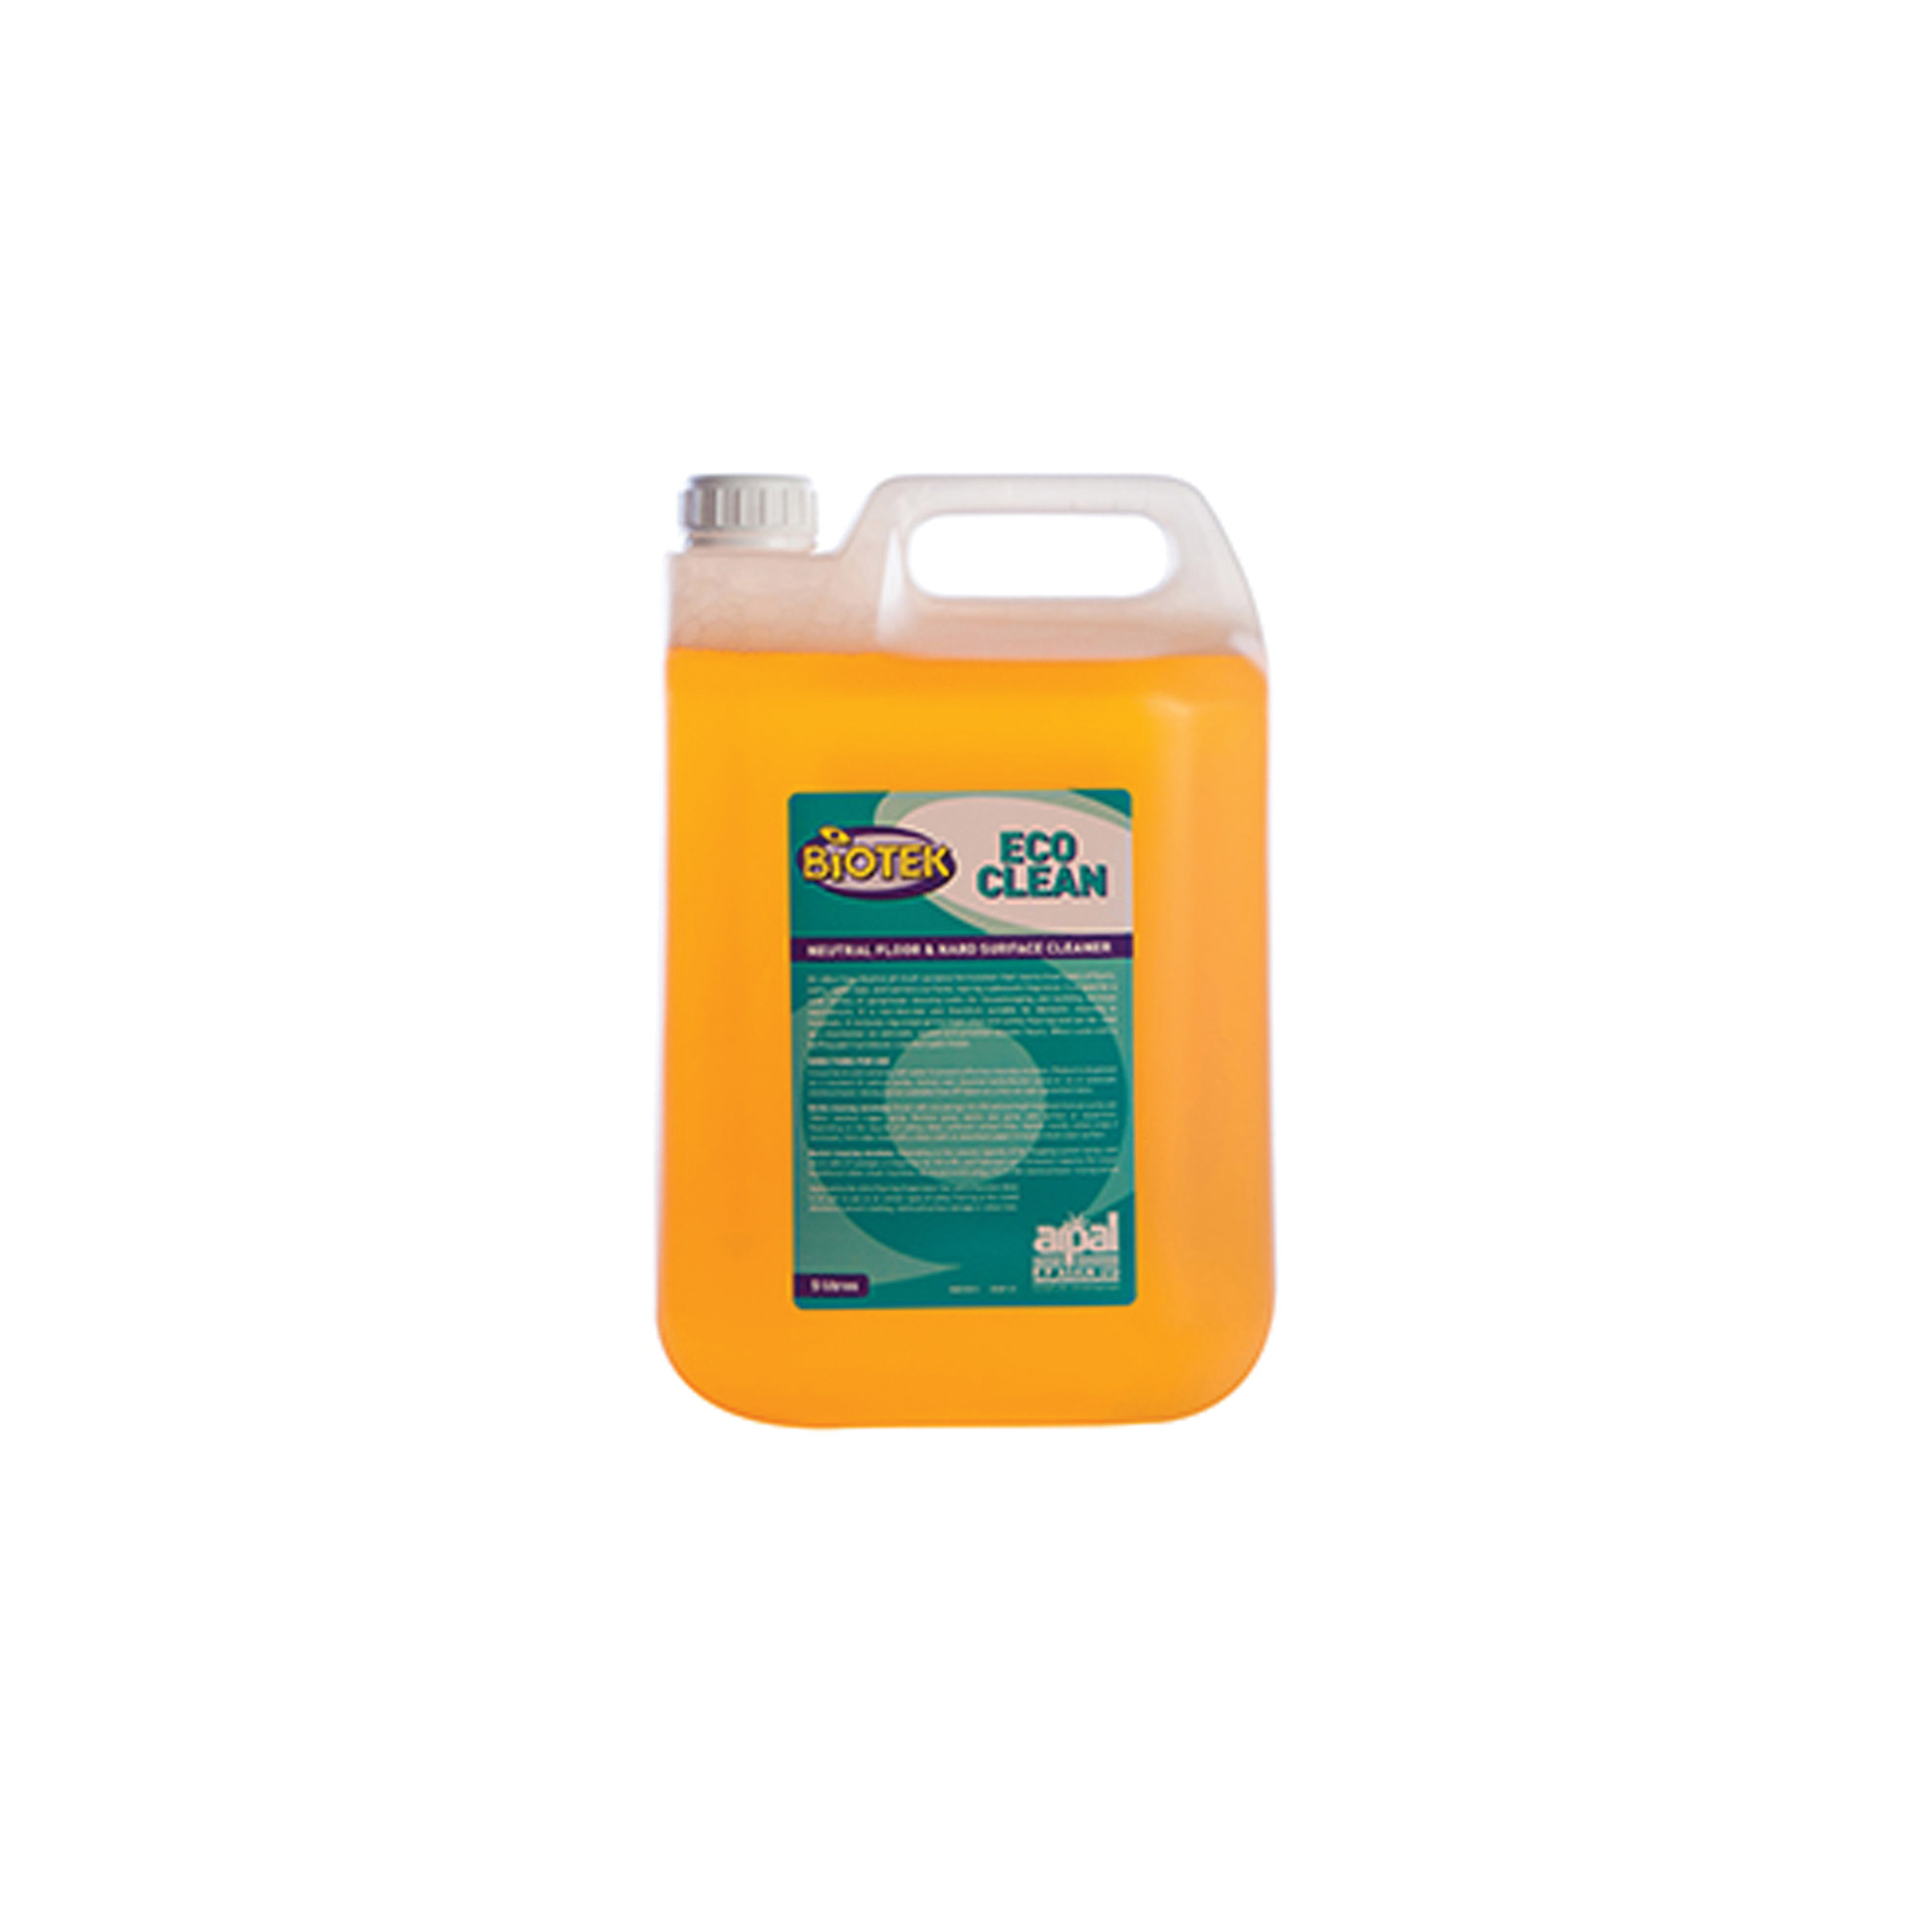 Biotexk Eco Clean Floor and hard Surface Cleaner (altro safe) 5Ltr - Case 2